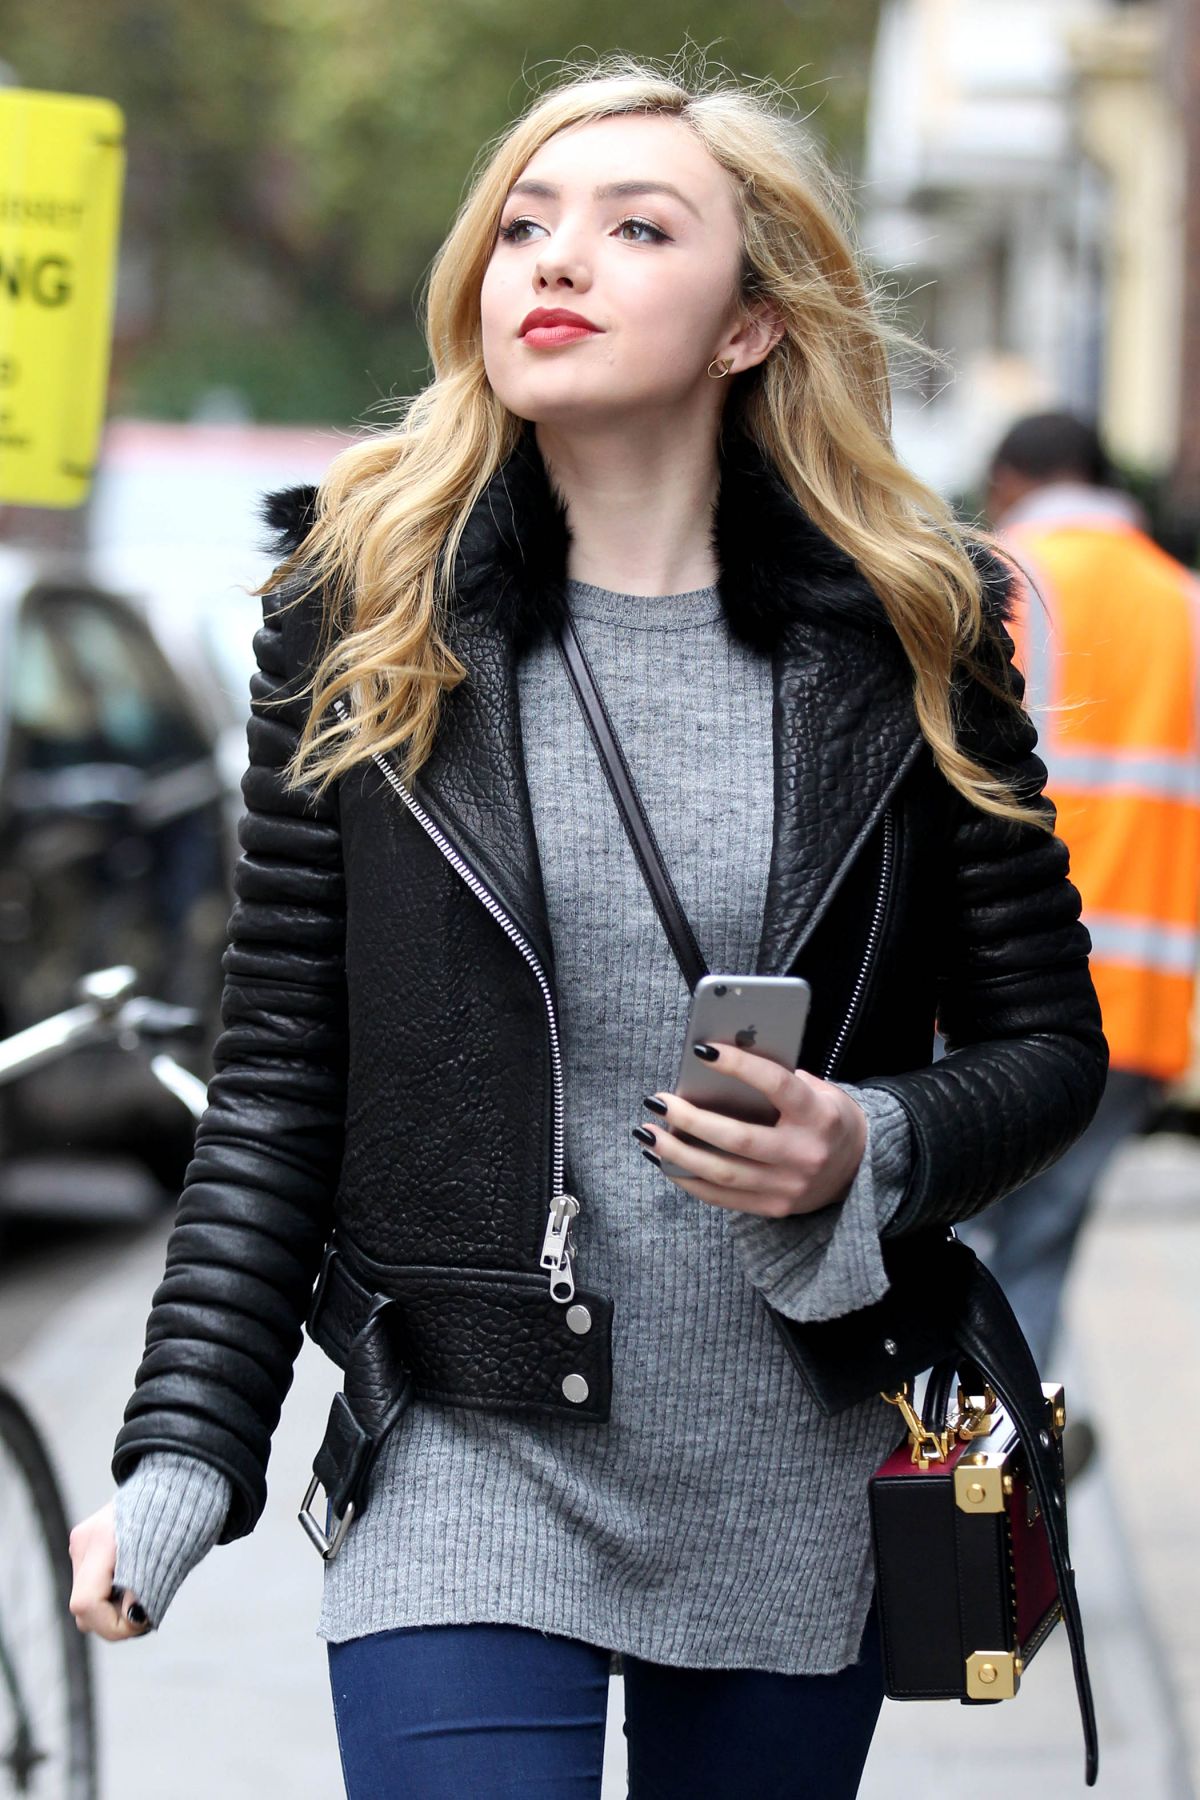 PEYTON LIST Out and About in London 11/02/2015 – HawtCelebs